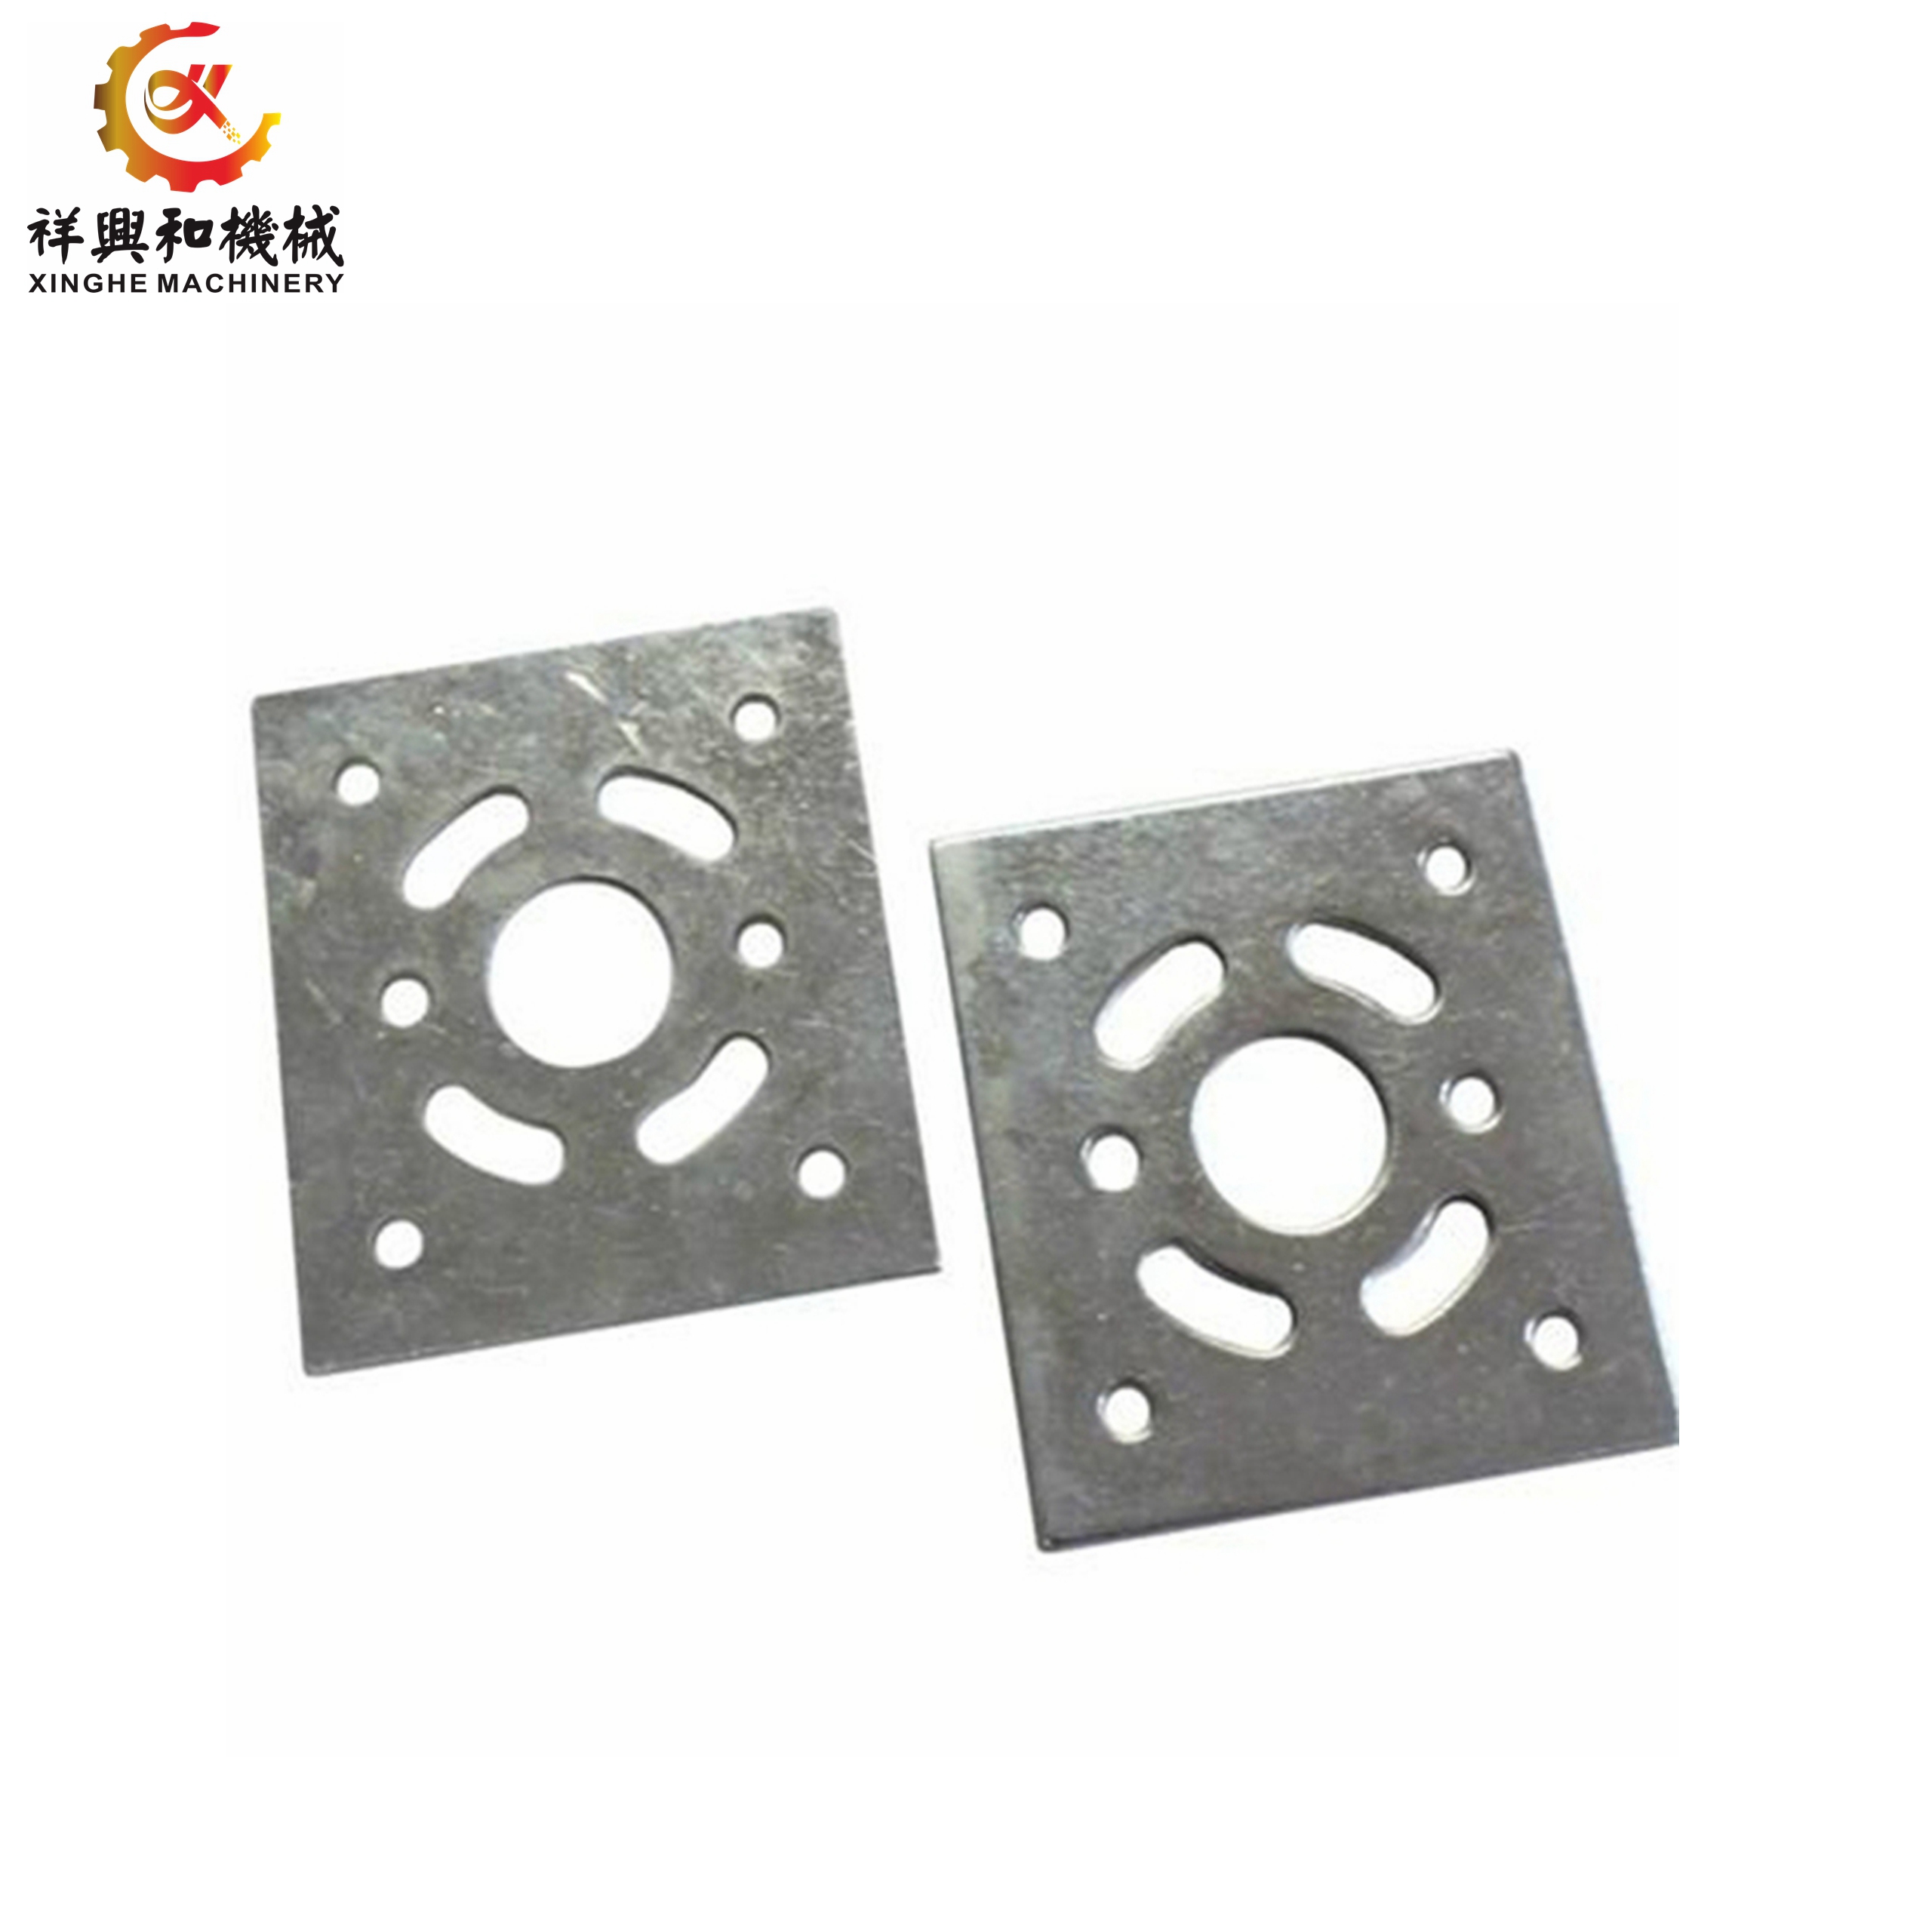 Customized Metal Stamping with Cnc Machining From China Manufactures